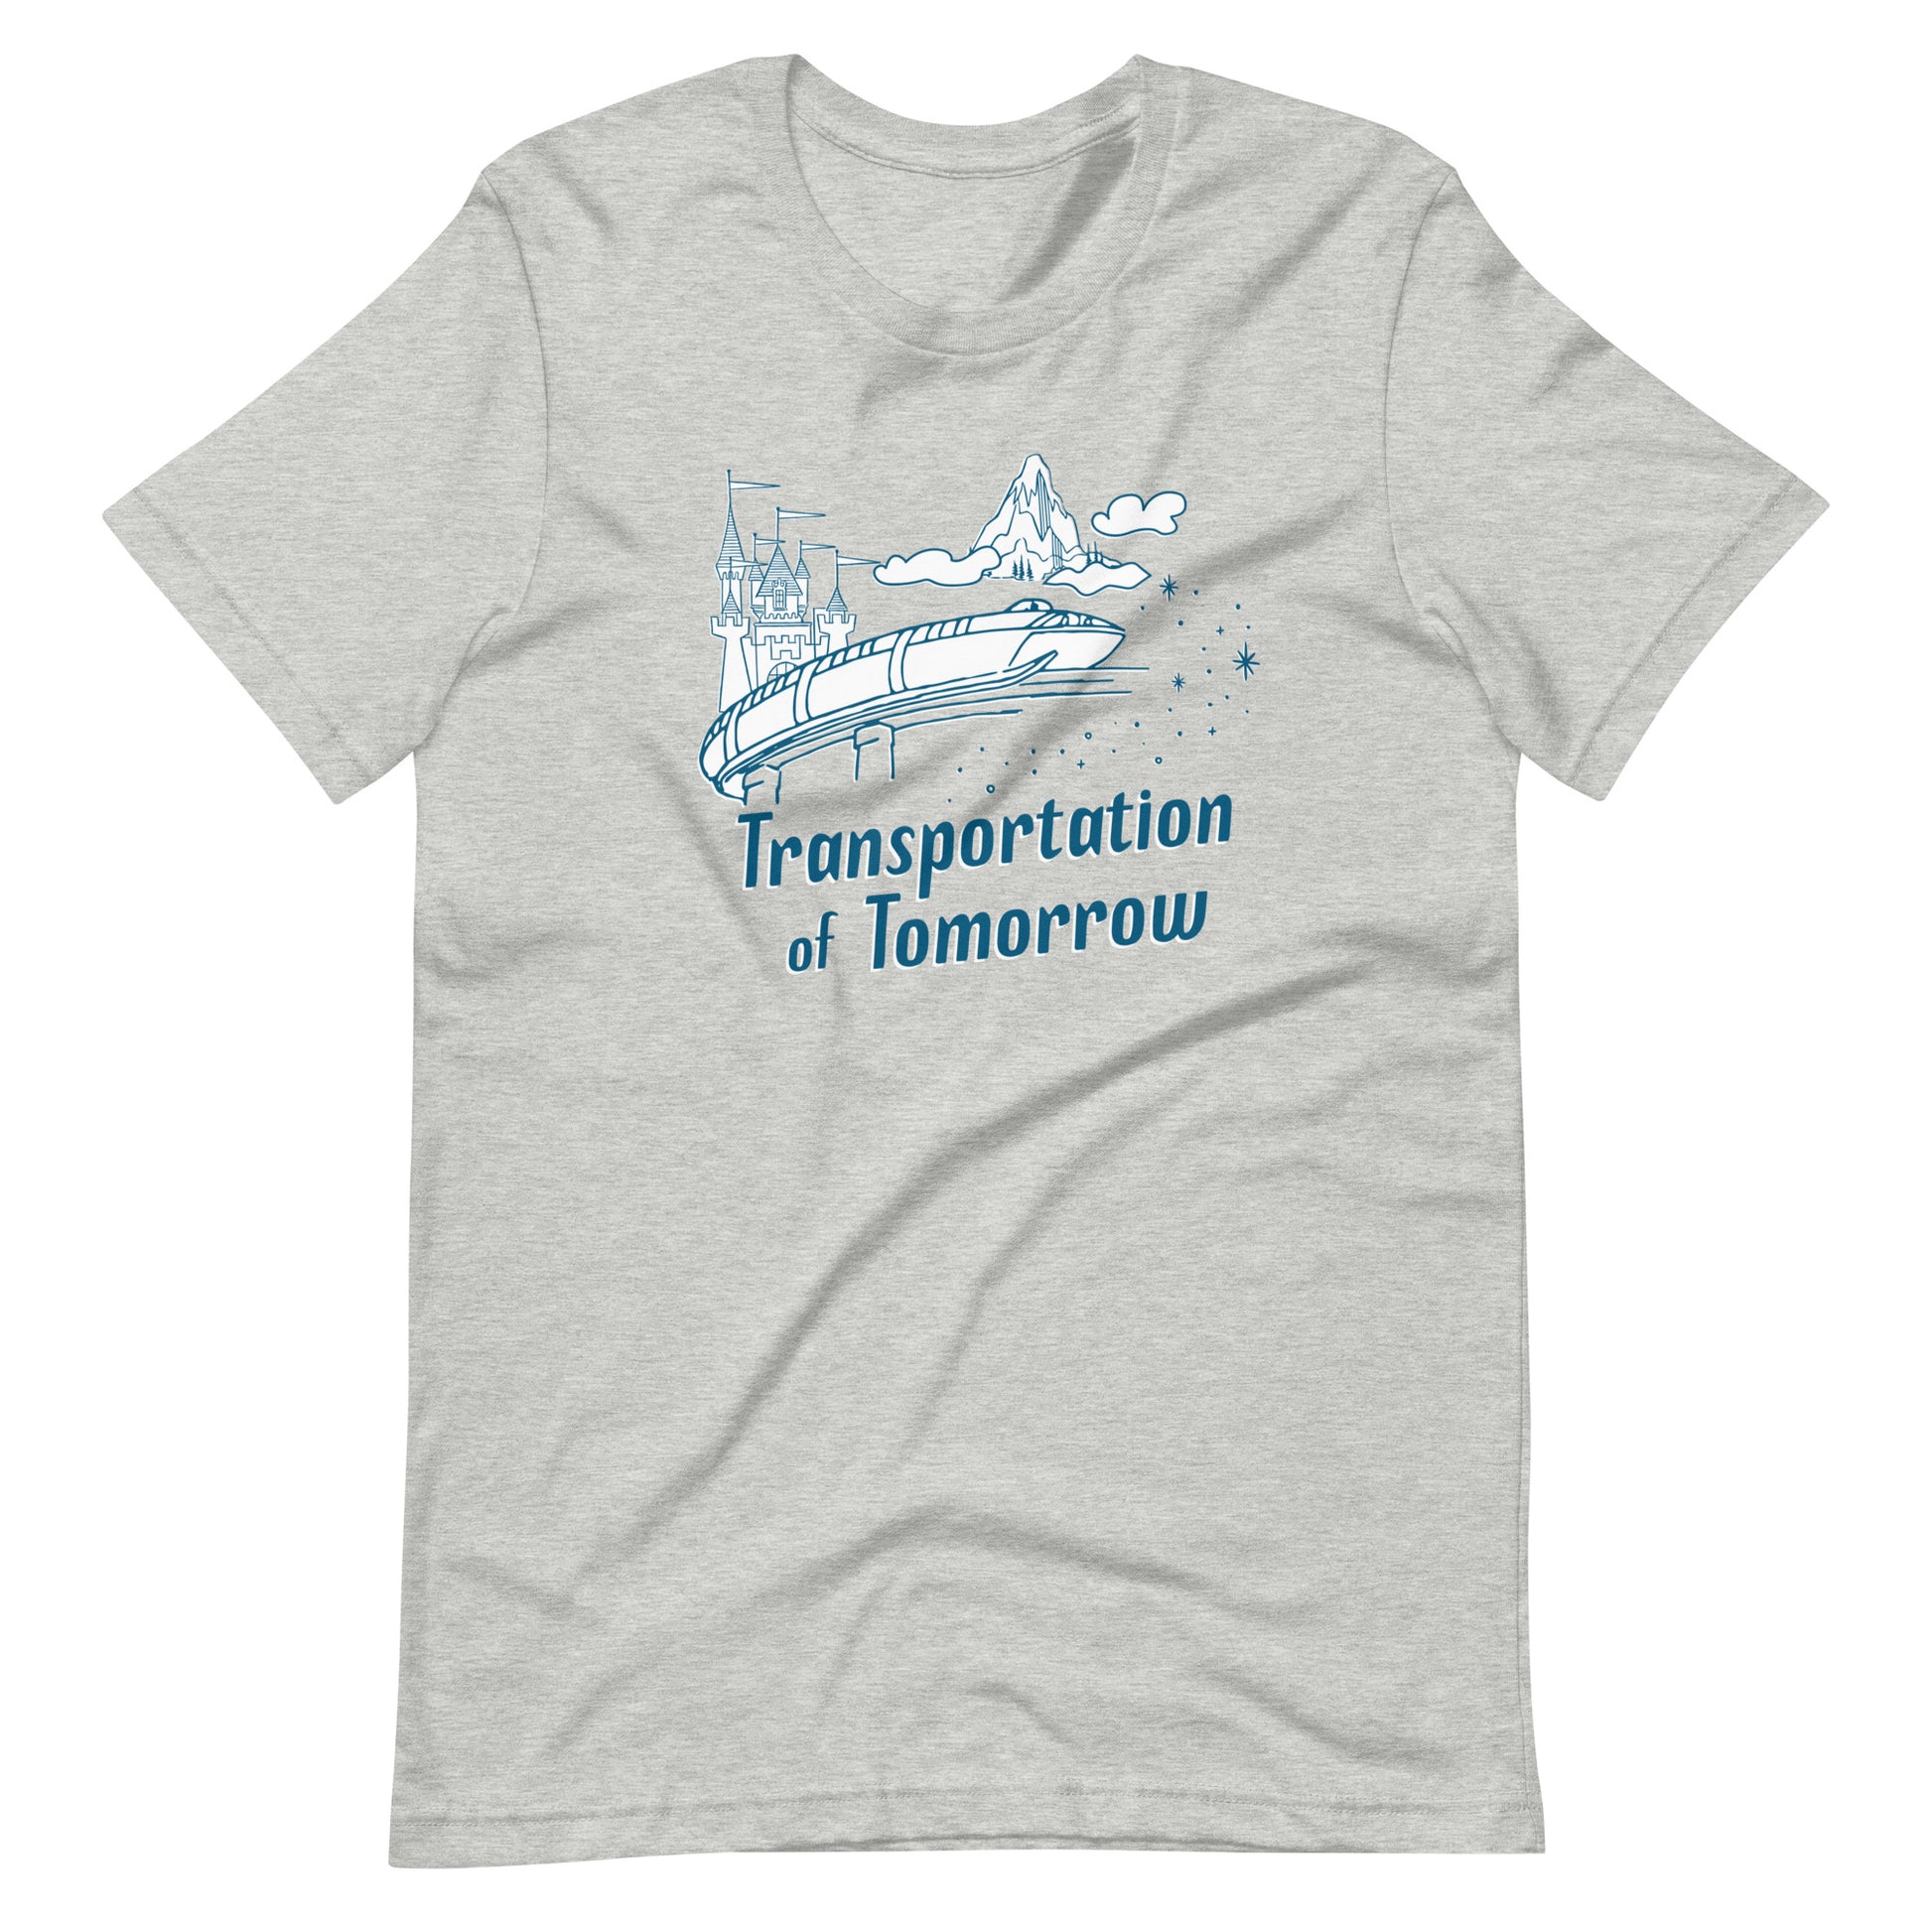 Gray shirt printed with vintage style sketch of the Matterhorn, Castle, and Monorail with pixie dust. The shirt says Transportation of Tomorrow.